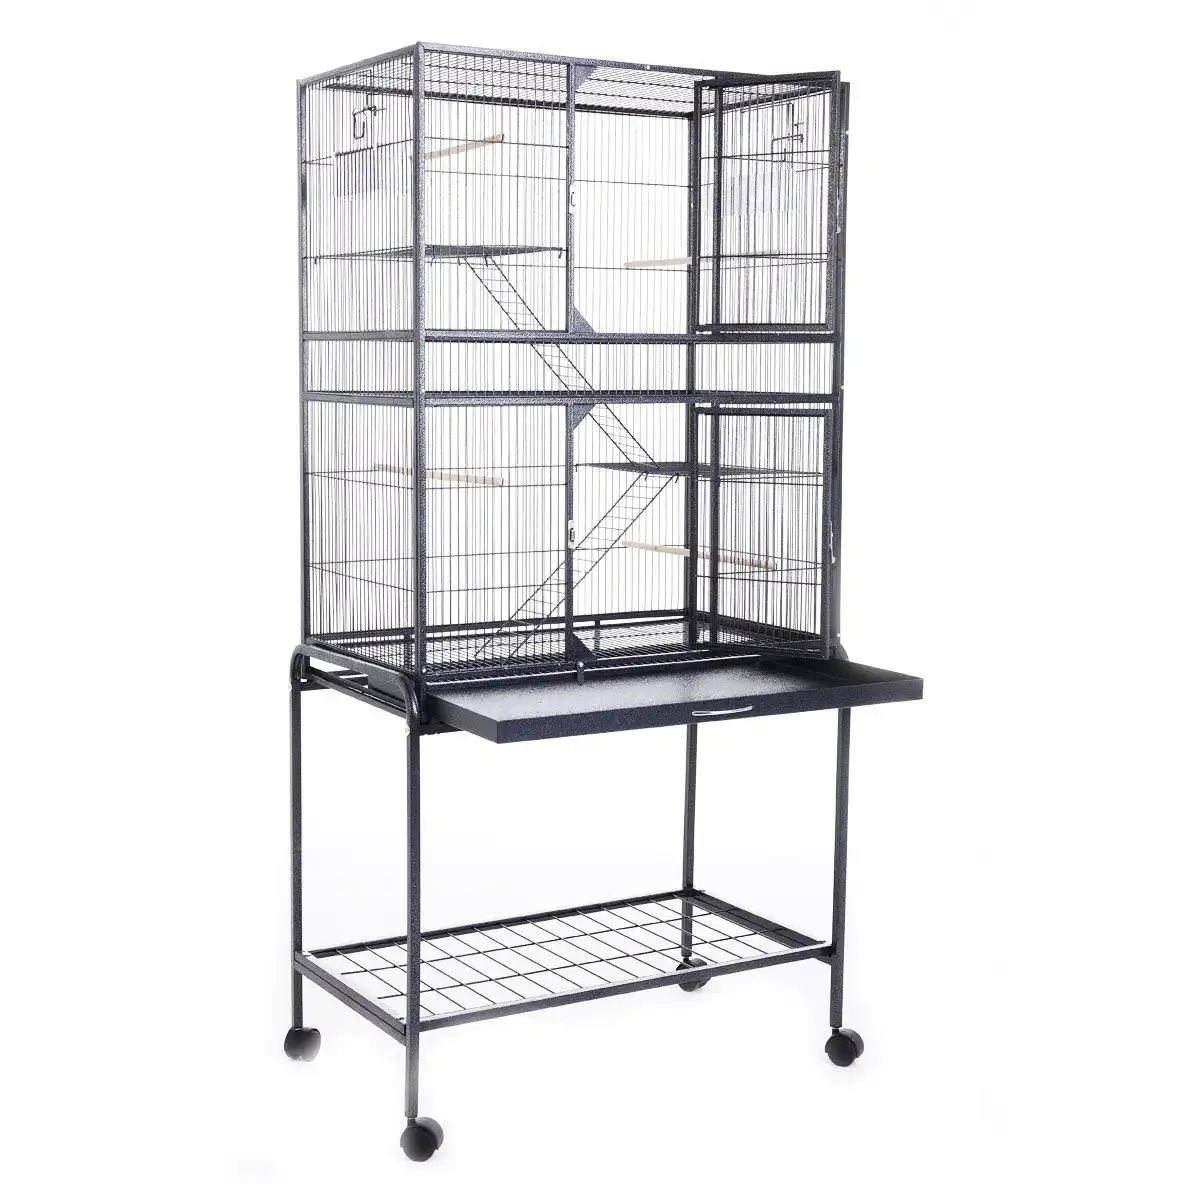 Ausway Large Space Cage on Wheels for Birds Parrot